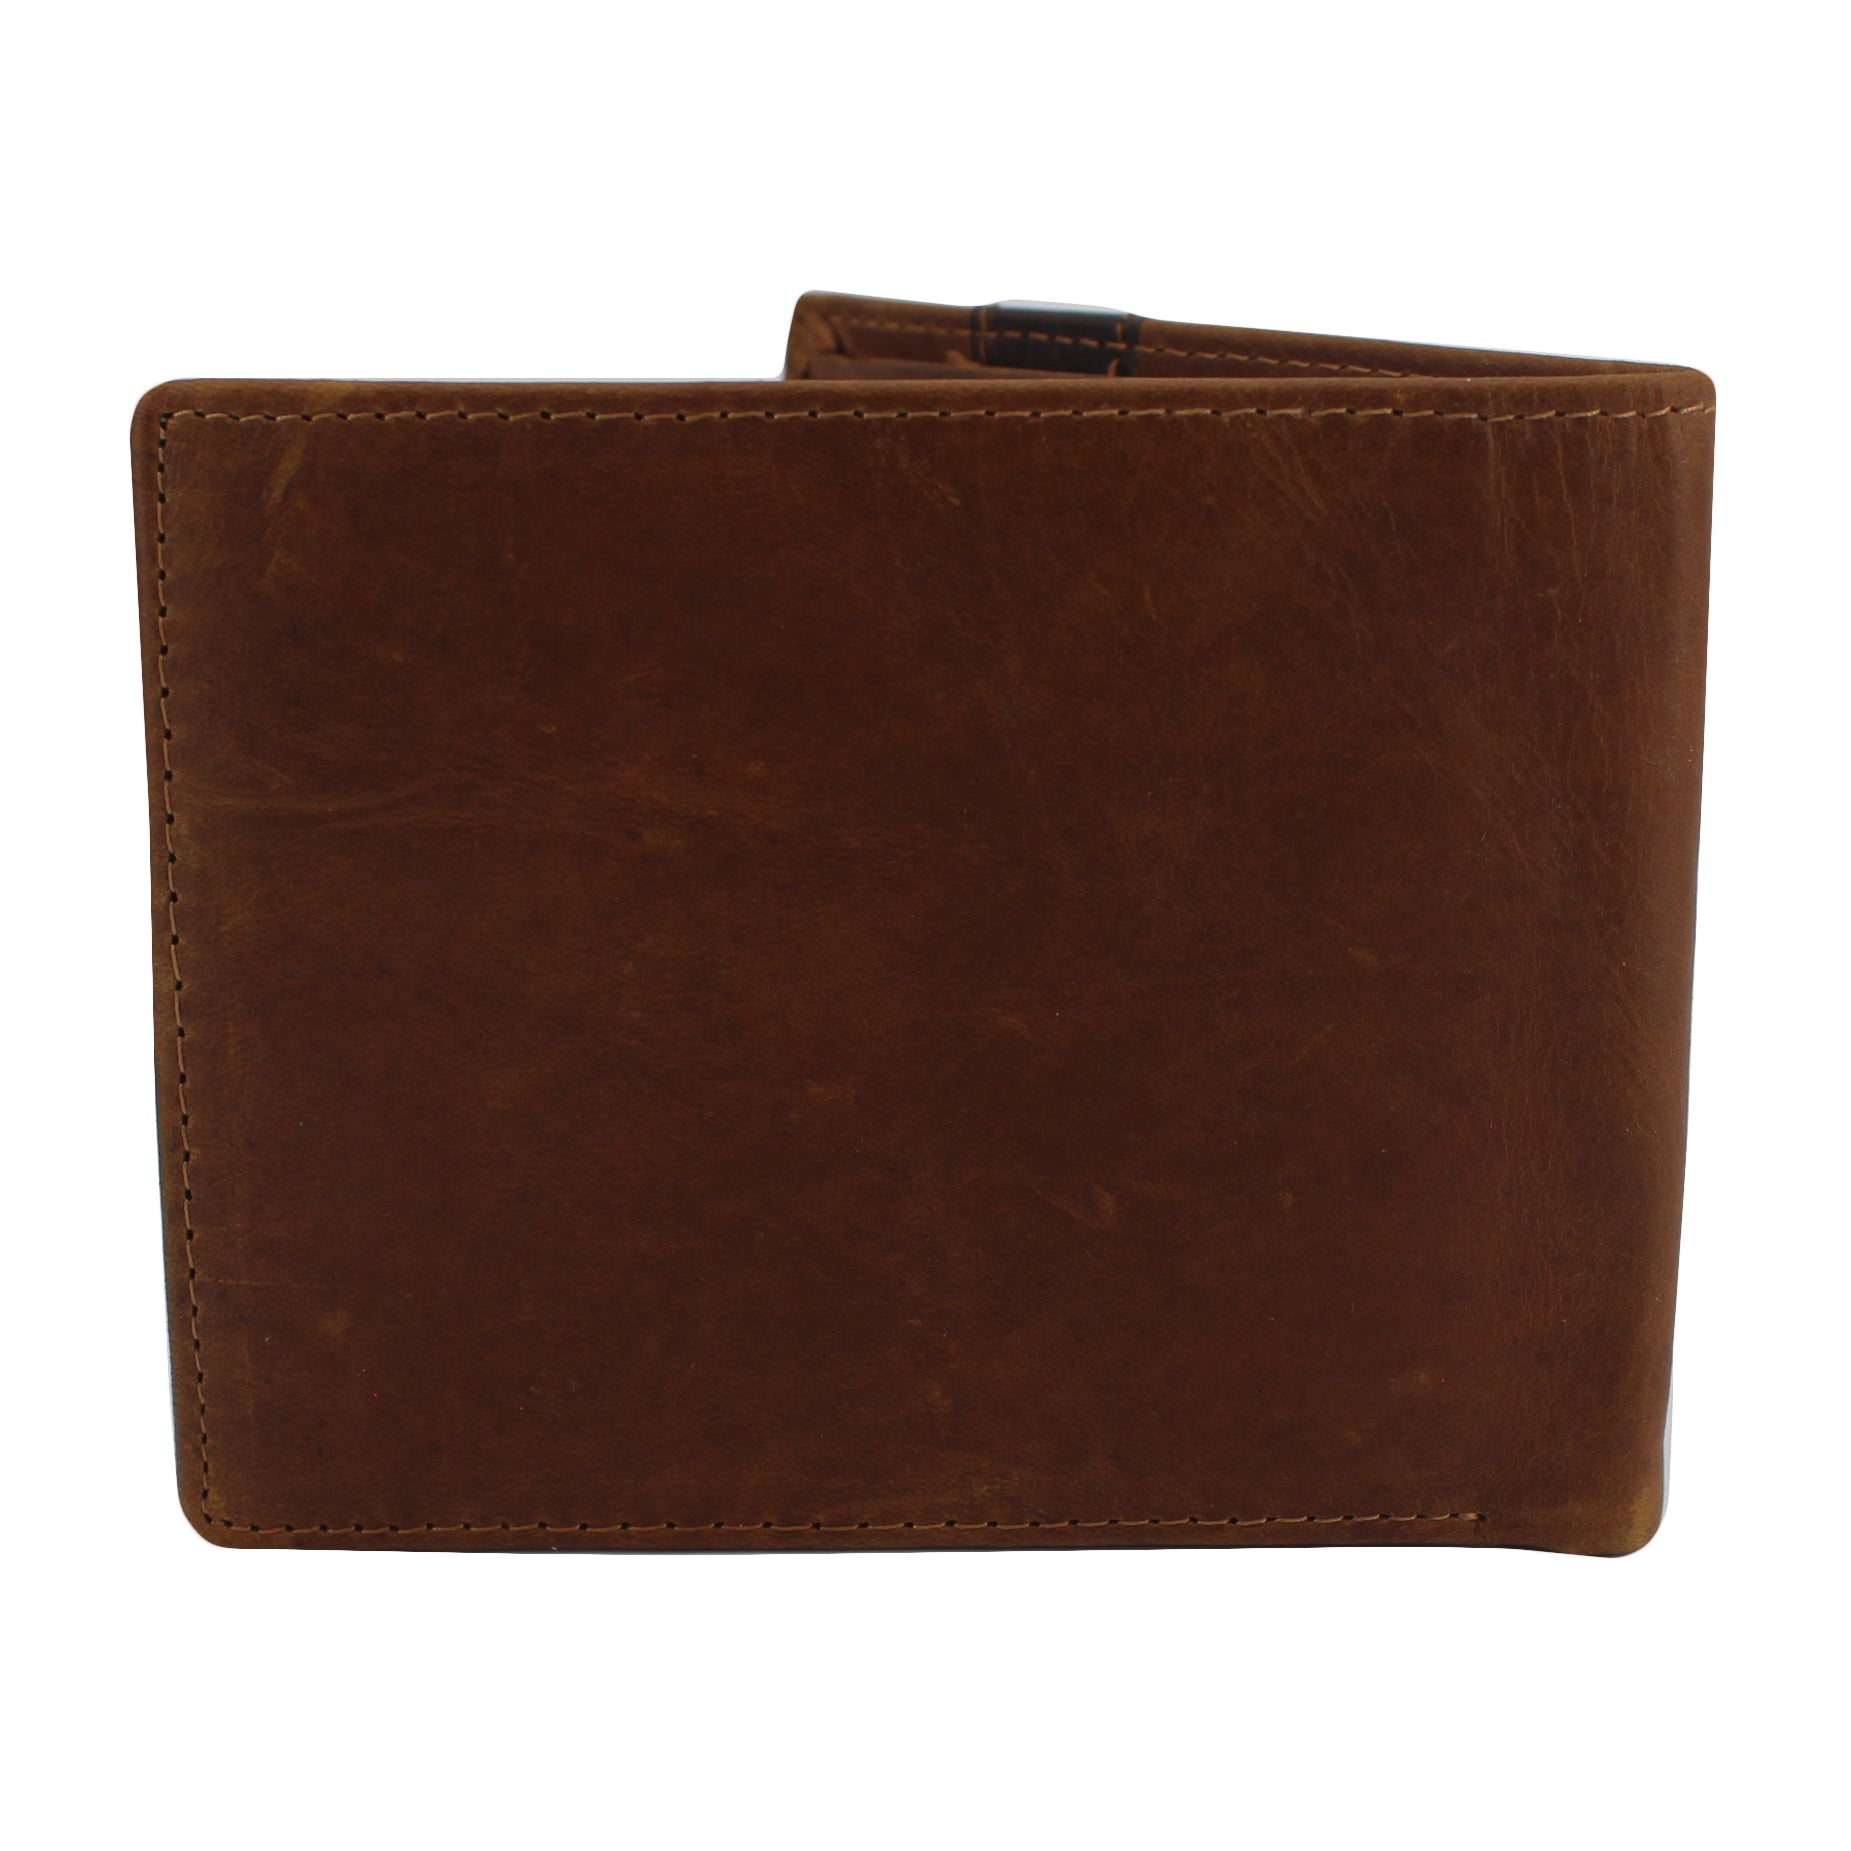 YBONNE Functional Compact RFID Blocking Bifold Wallet for Men, Made of Finest Genuine Leather